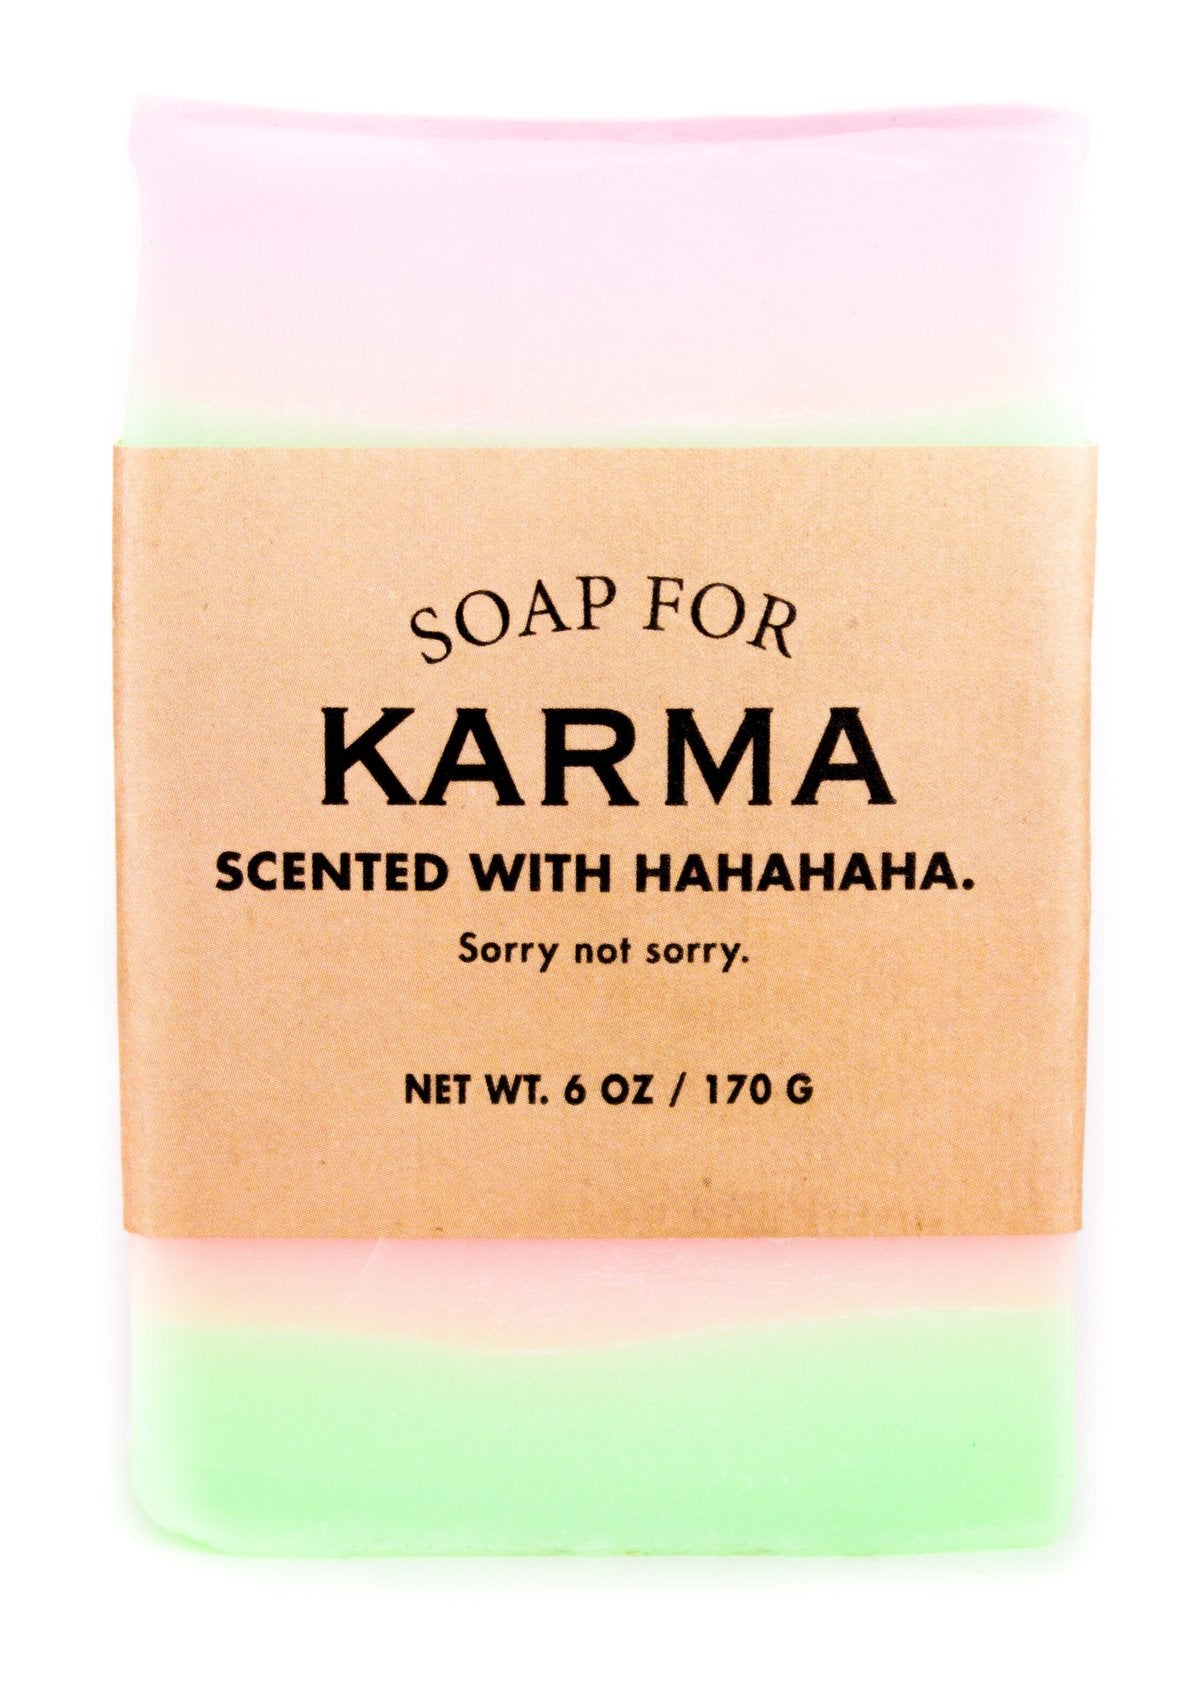 Soap for Karma - Heart of the Home PA